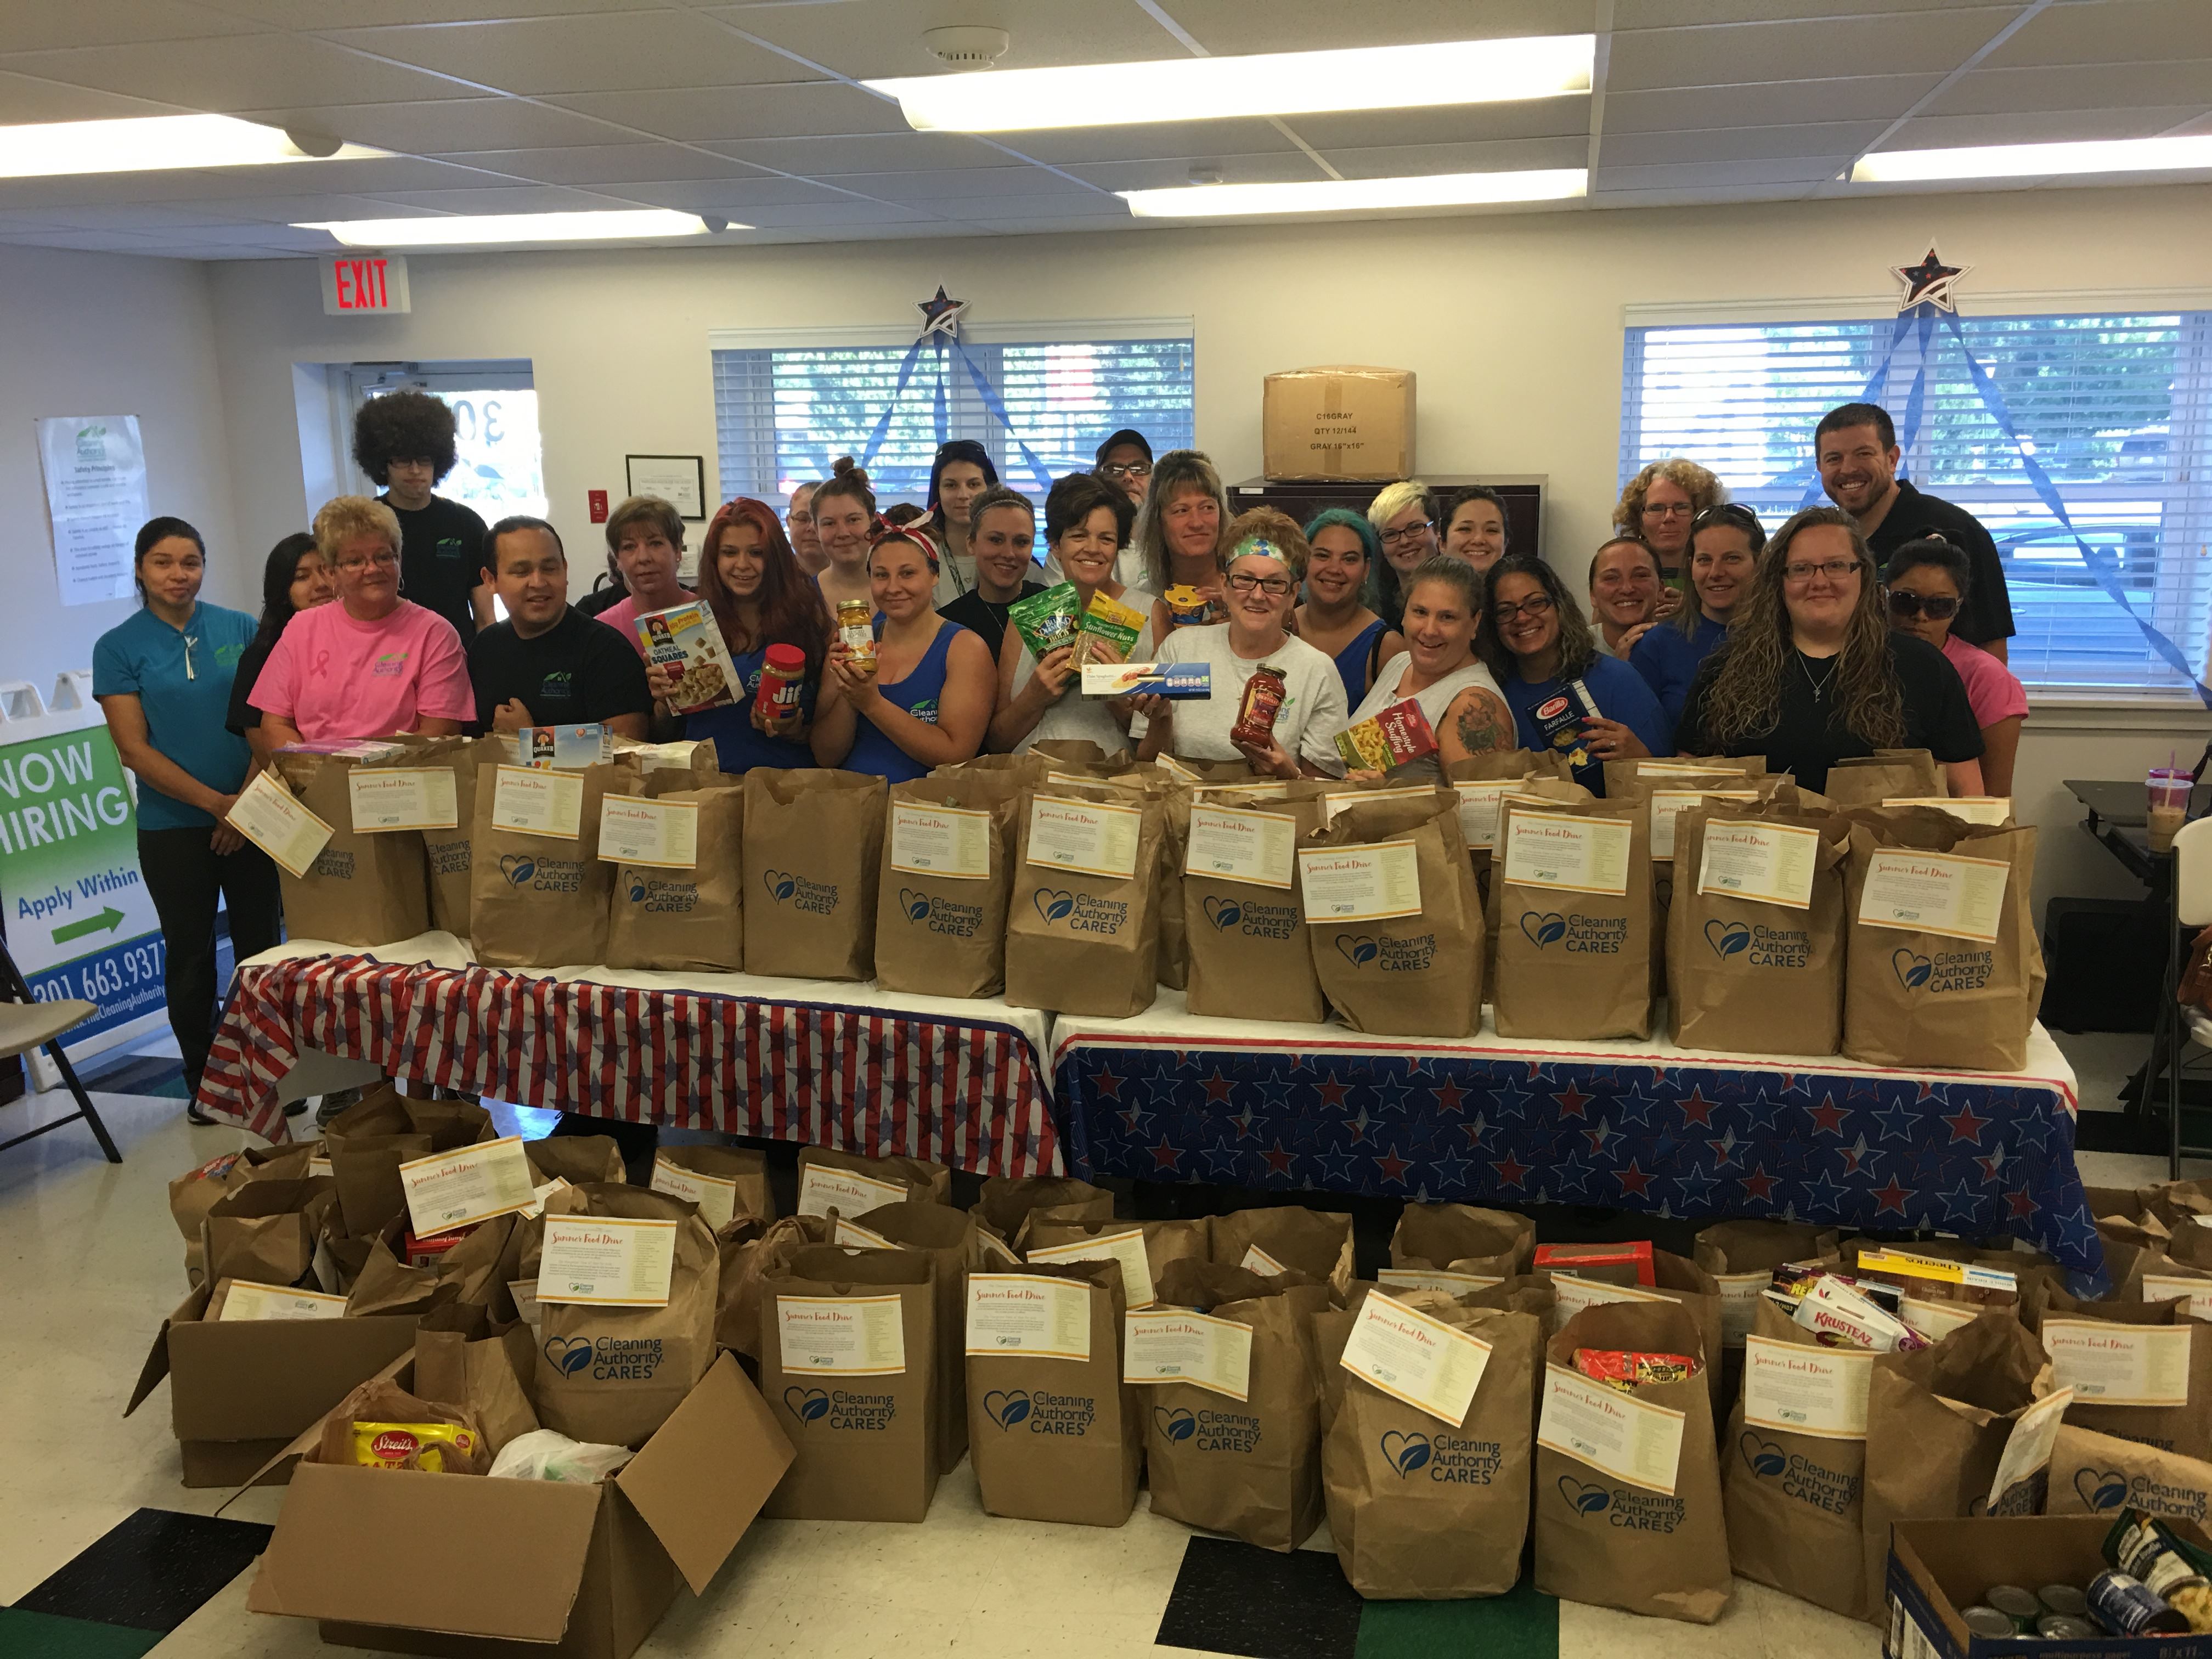 The TCA Frederick team poses with the food donations collected for local charities.